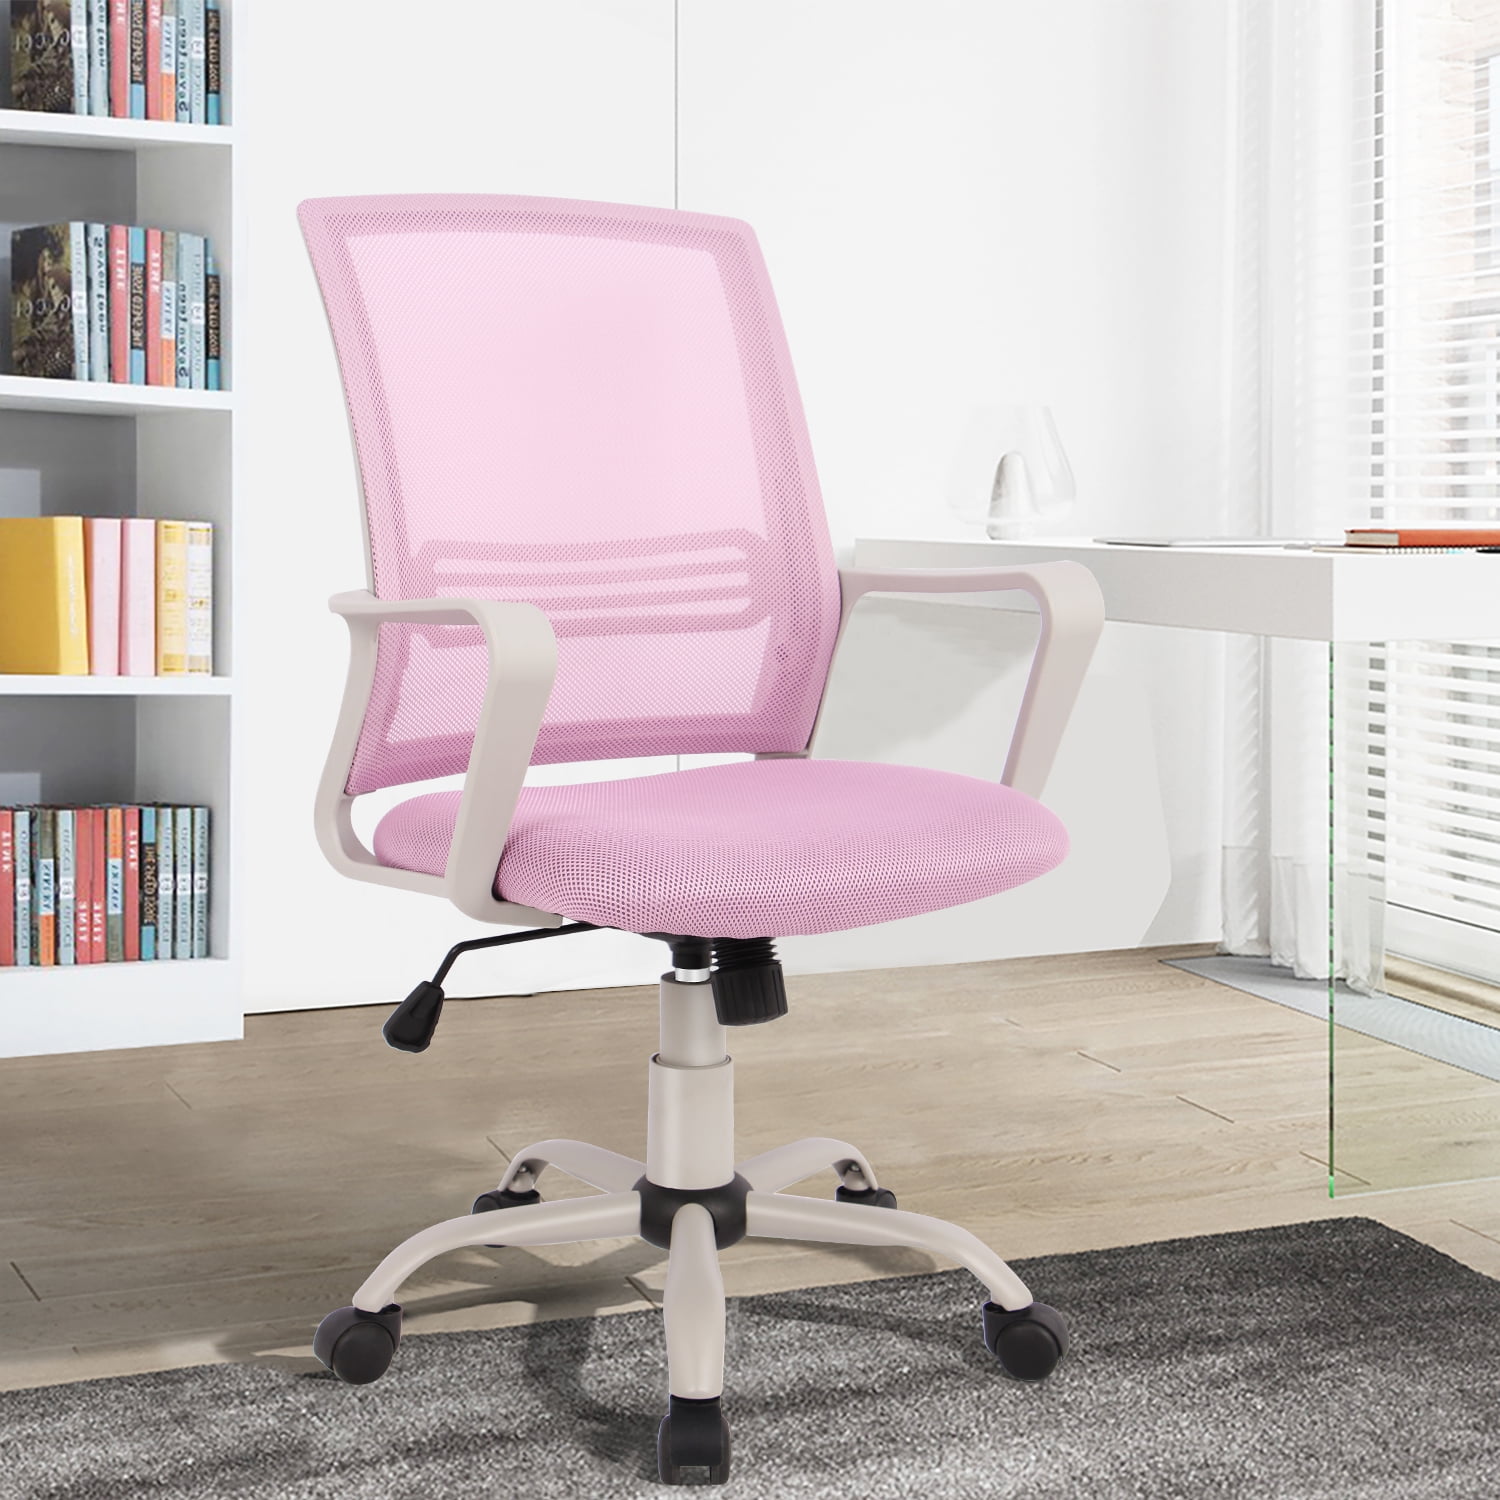 Home Office Chair Ergonomic Desk Chair Mesh Computer Chair With Lumbar Support Pink